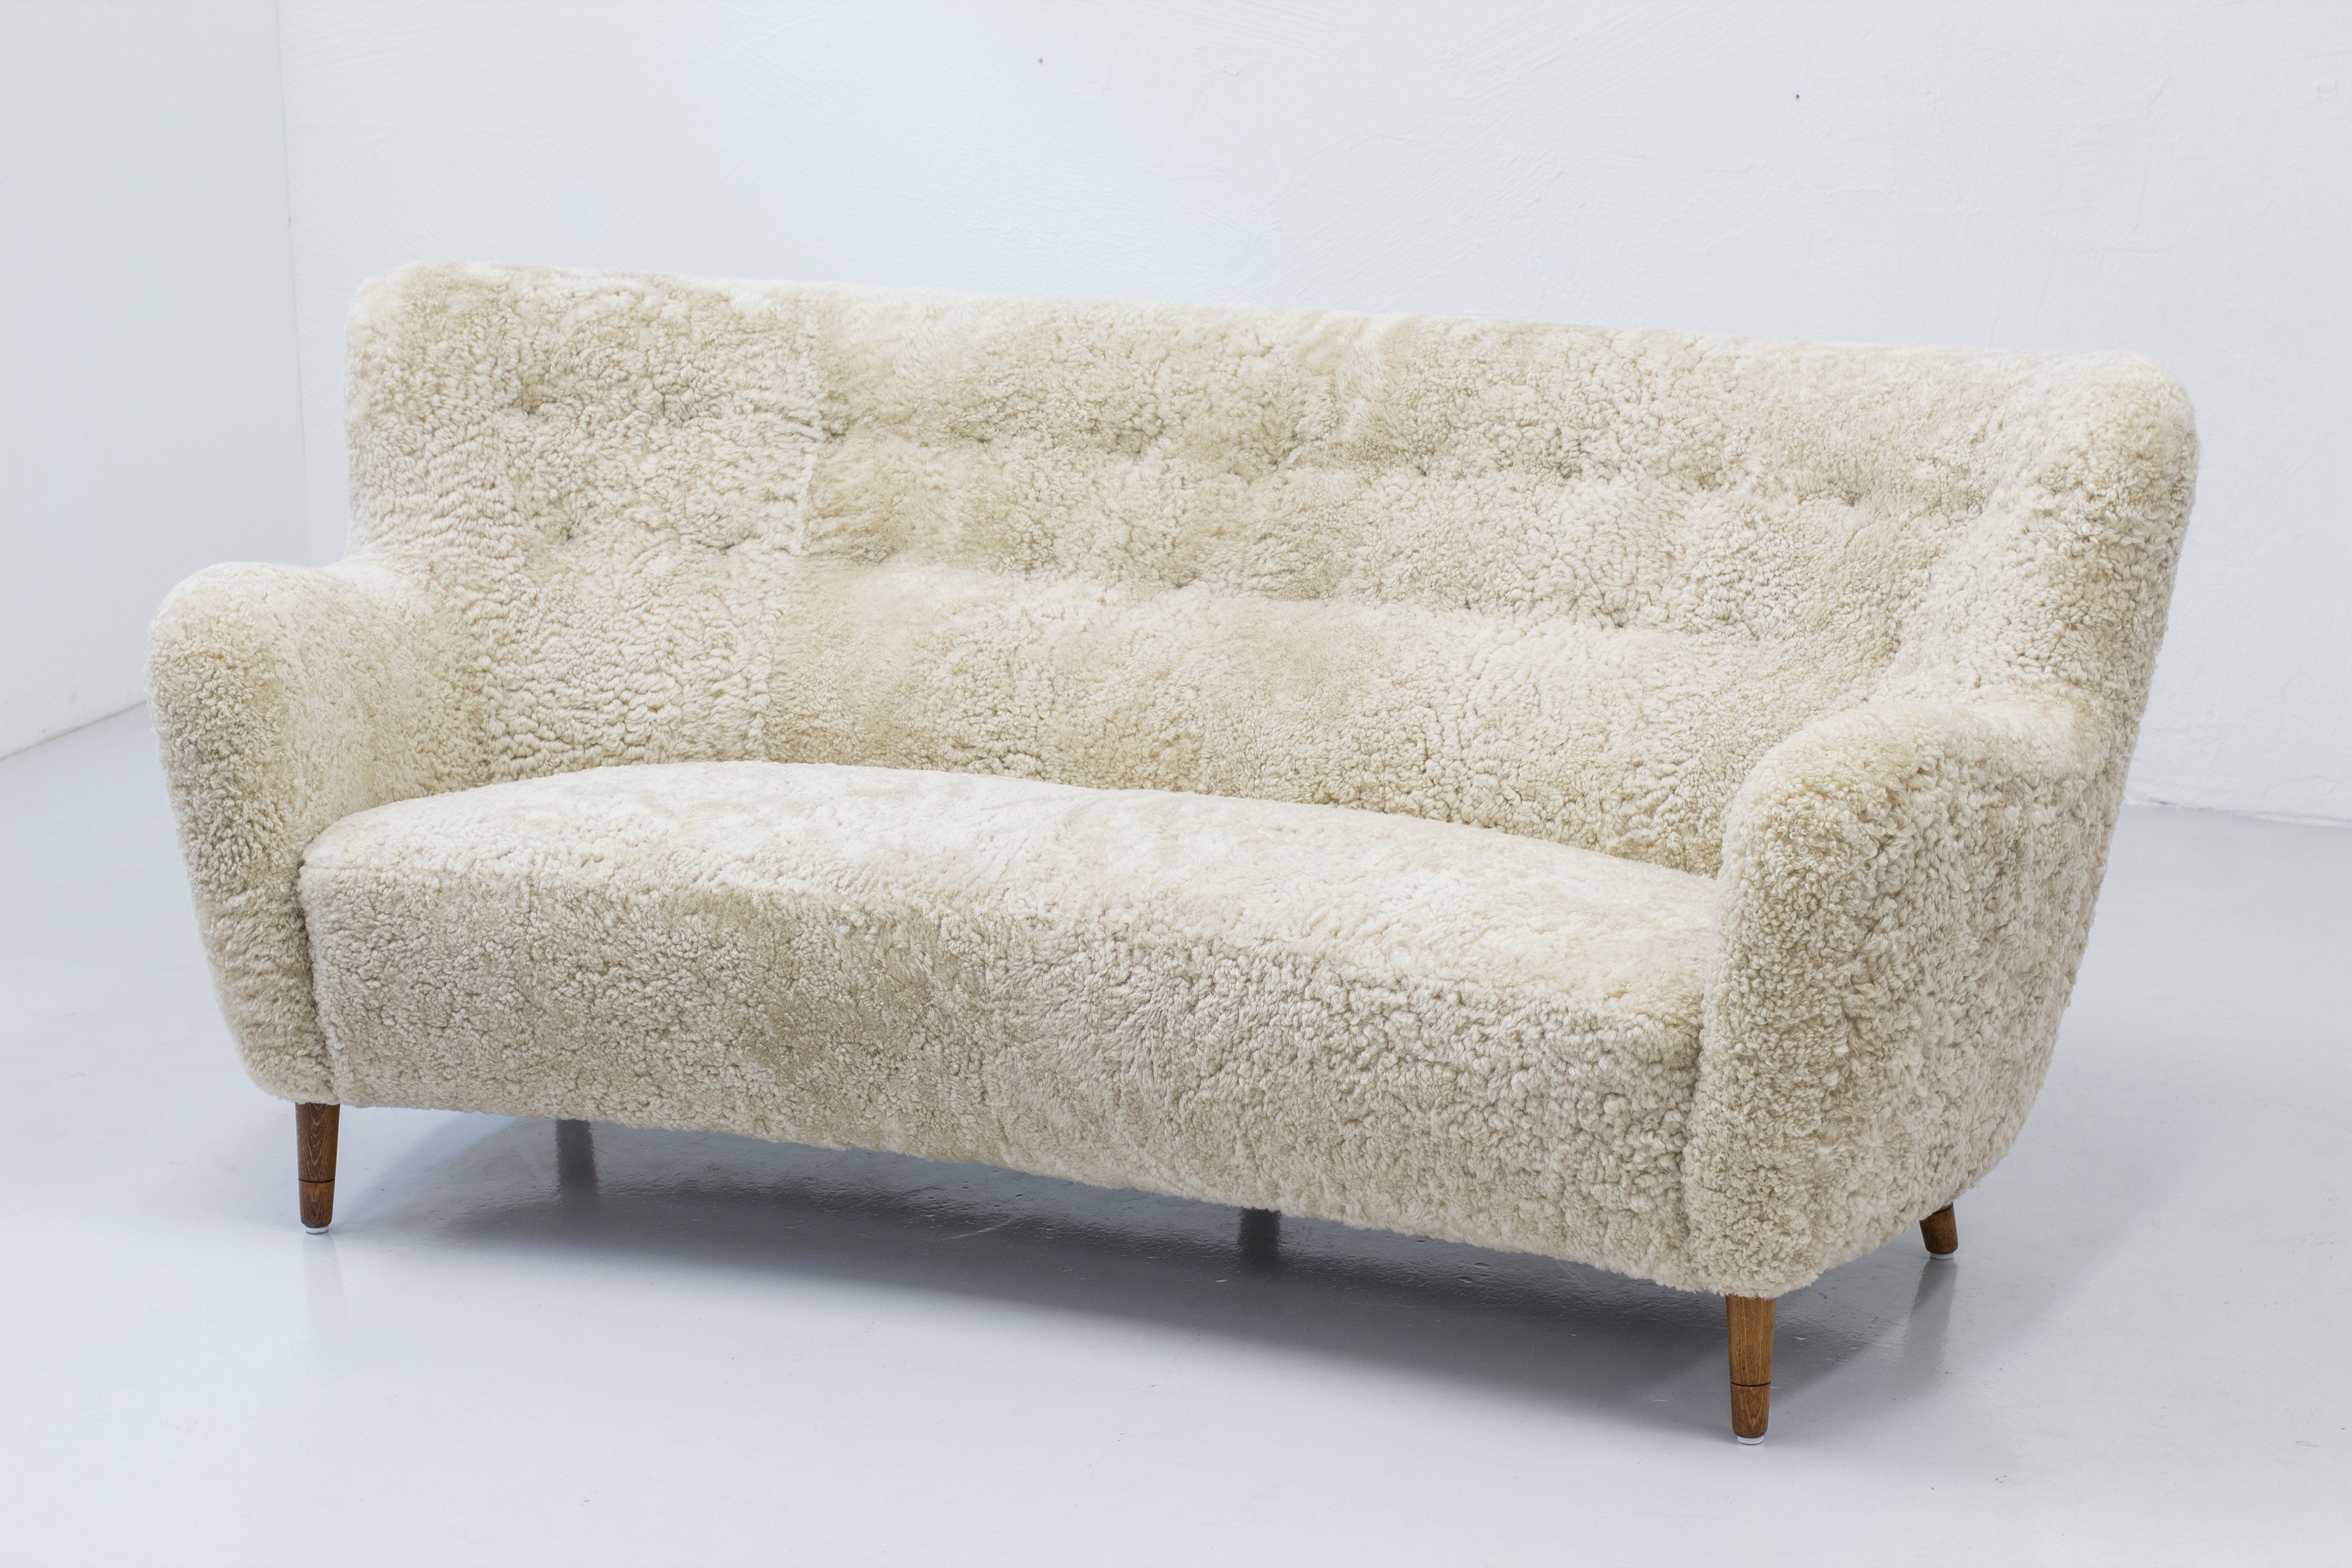 Danish modern sofa in the manner of Finn Juhl. Reupholstered with creme colored sheep skin. Slightly tapered legs in solid beech wood. Beautiful shape with a slight curve. Tufted back rest with brown leather buttons. The upholstery is new and the